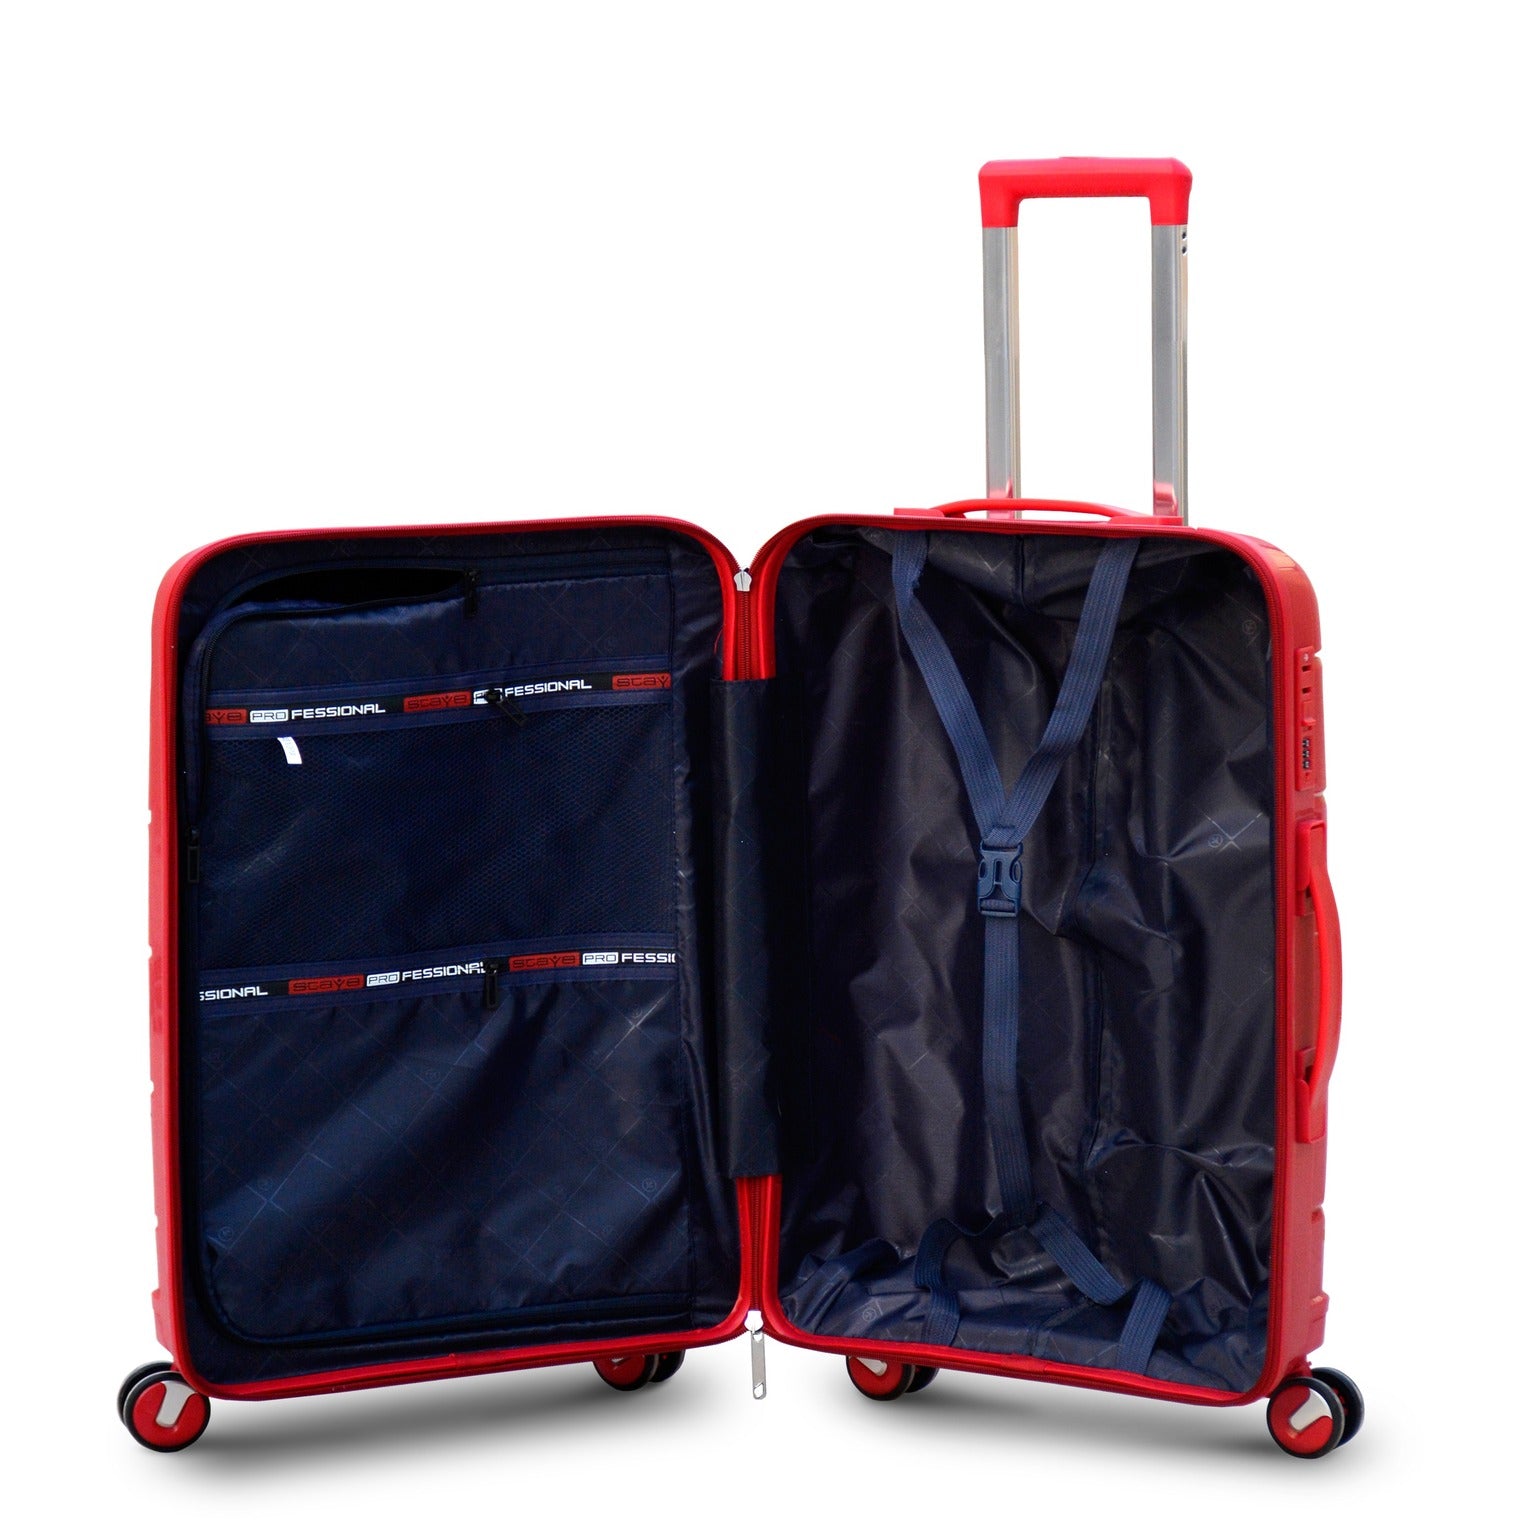 24" Red Colour Ceramic Smooth PP Luggage Lightweight Hard Case Trolley Bag With Double Spinner Wheel